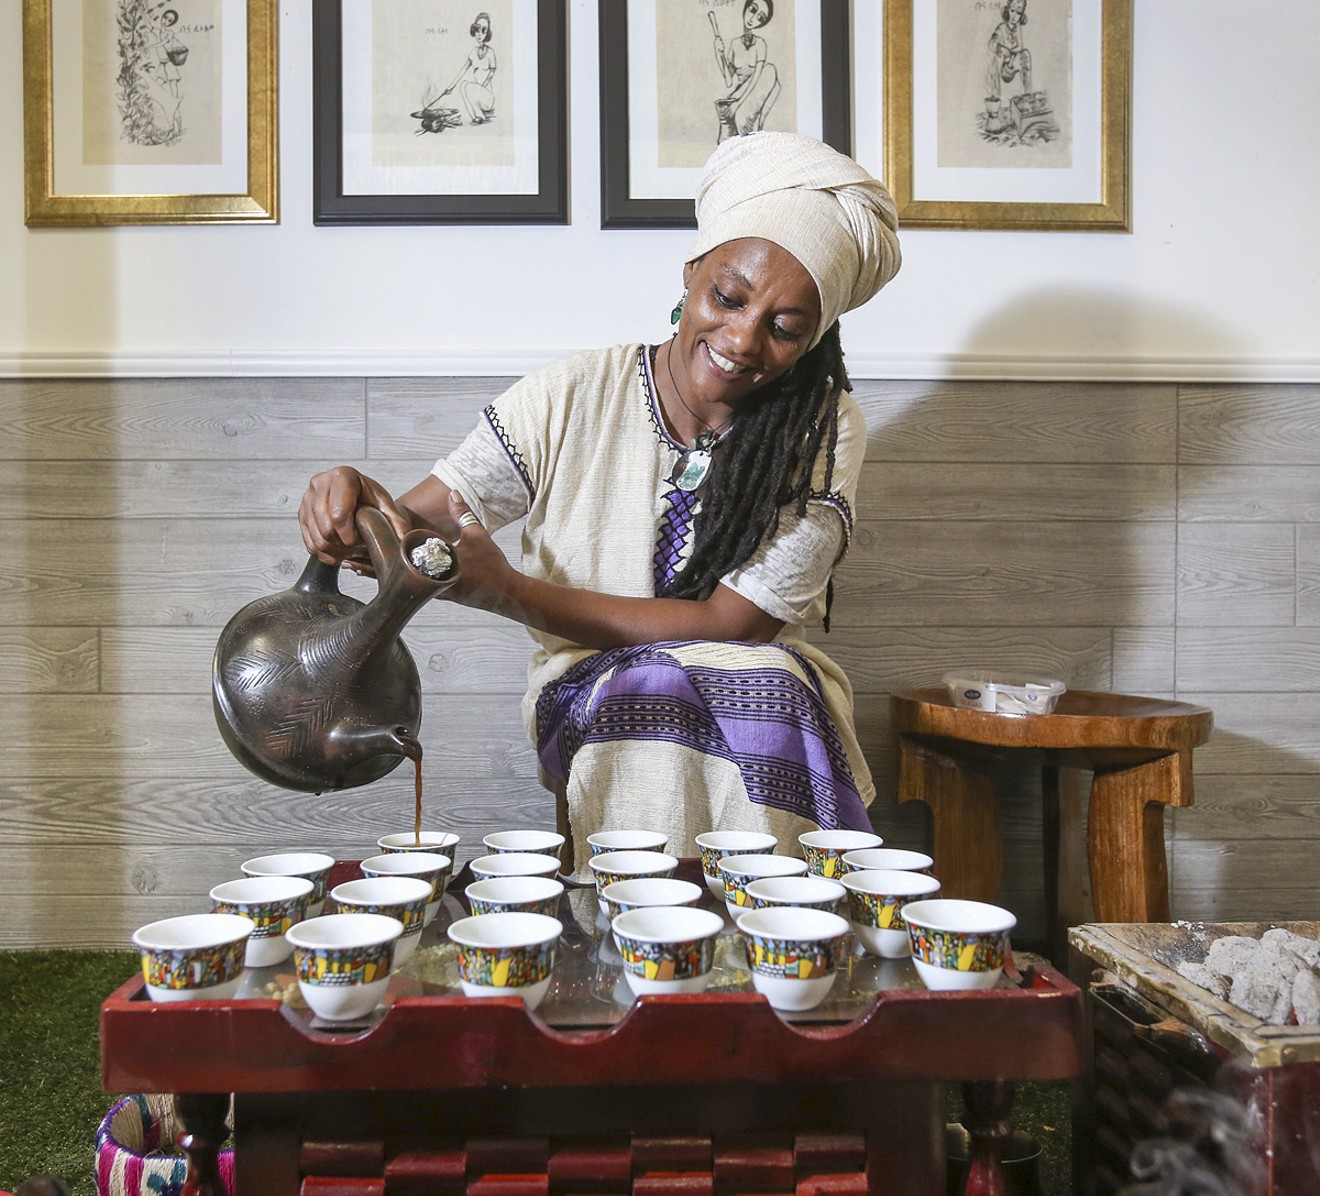 Abeba Laboy roasts and brews Ethiopian coffee. See more photos from Awash here.